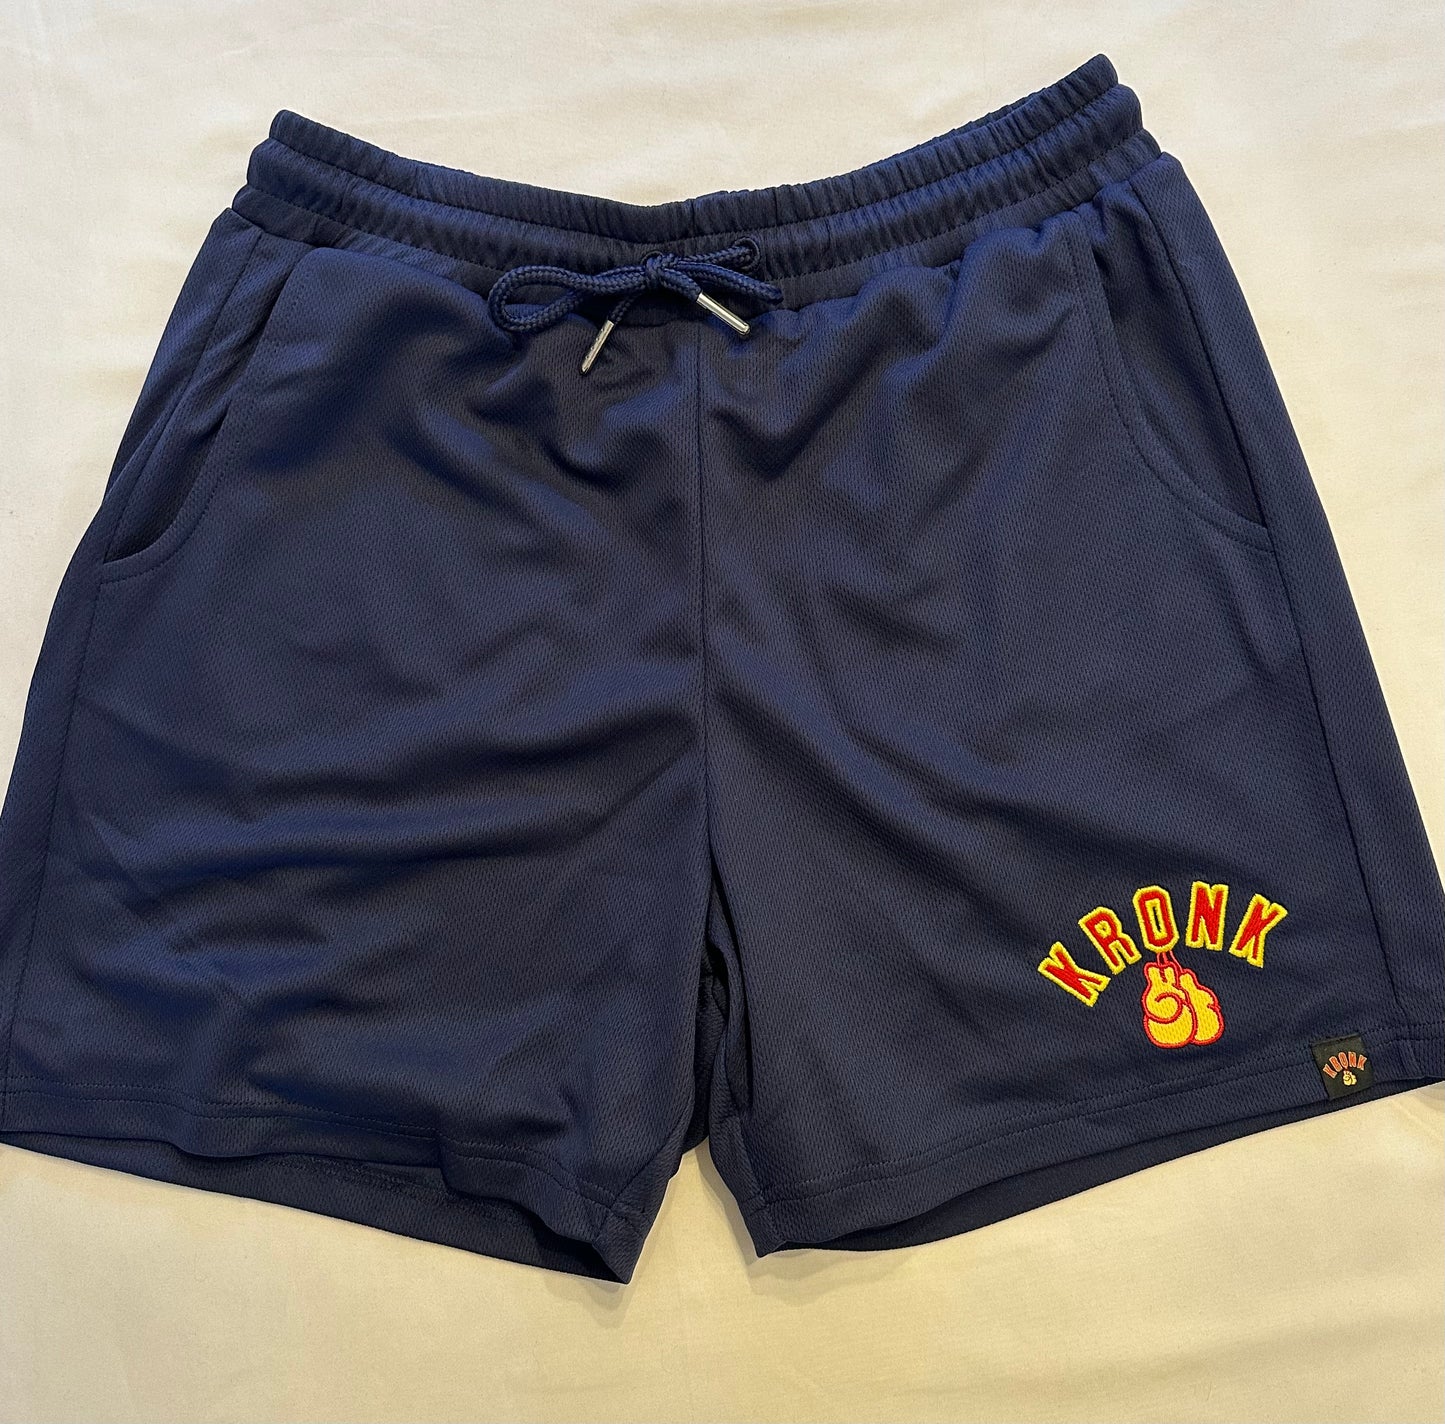 KRONK Gloves Applique Lined Gym Shorts Navy